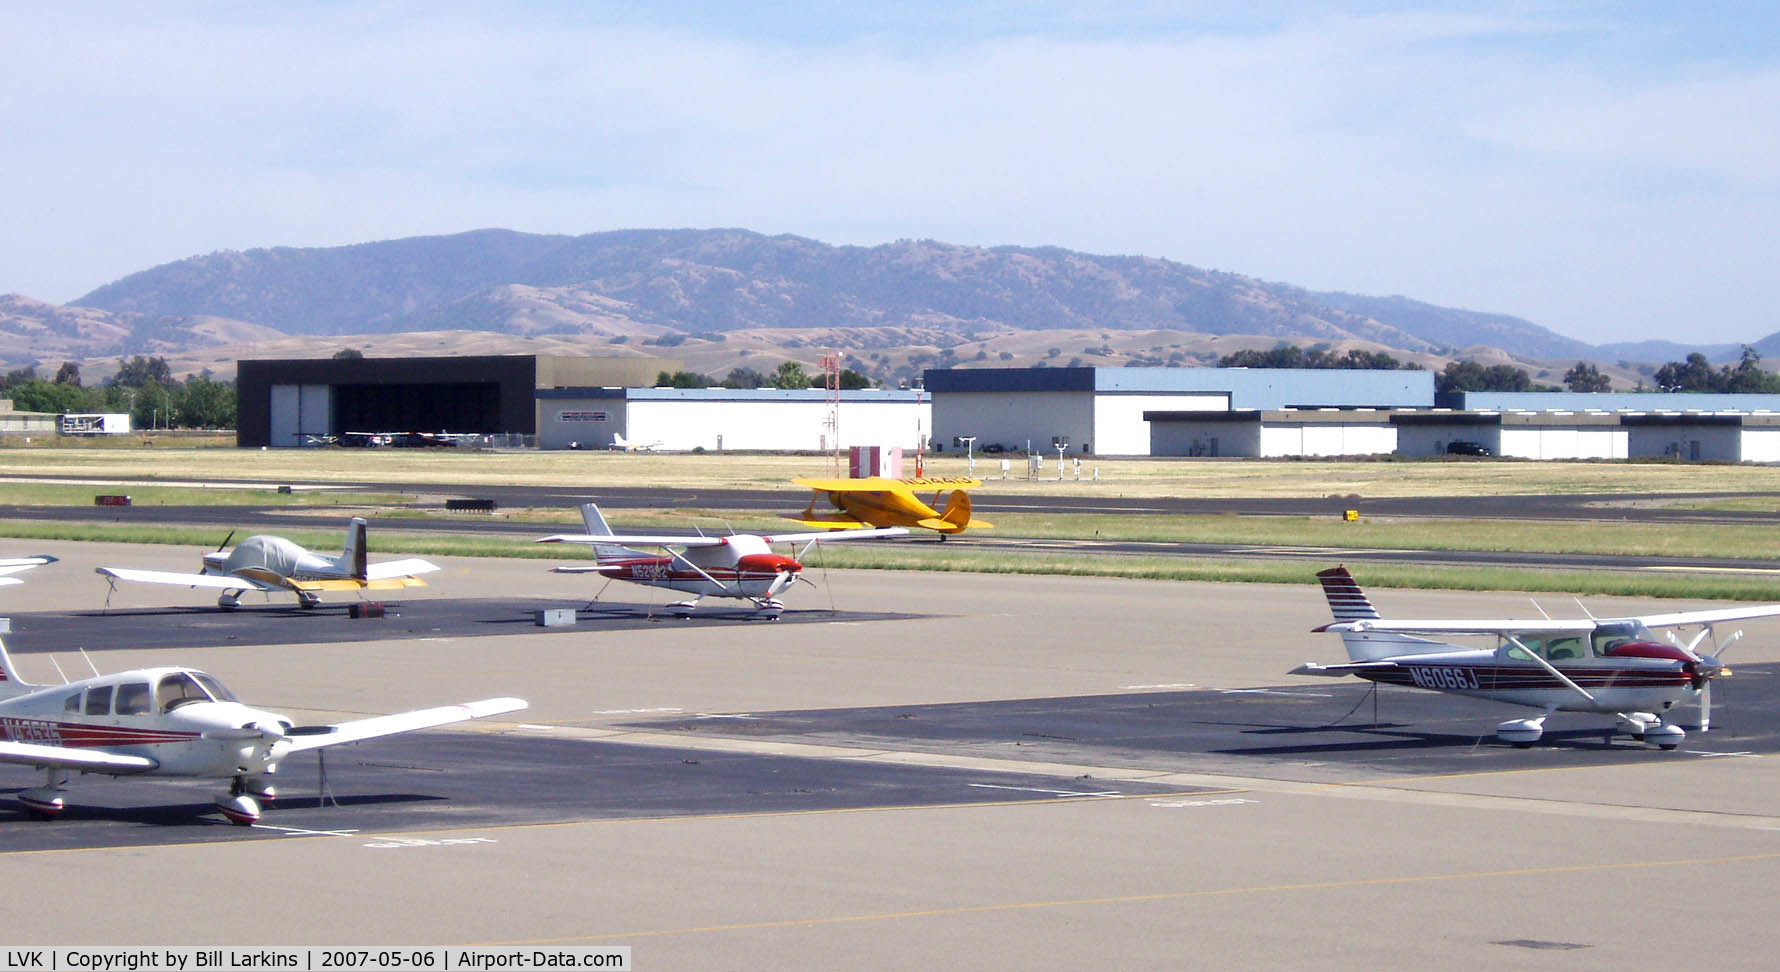 Livermore Municipal Airport (LVK) - North side of field